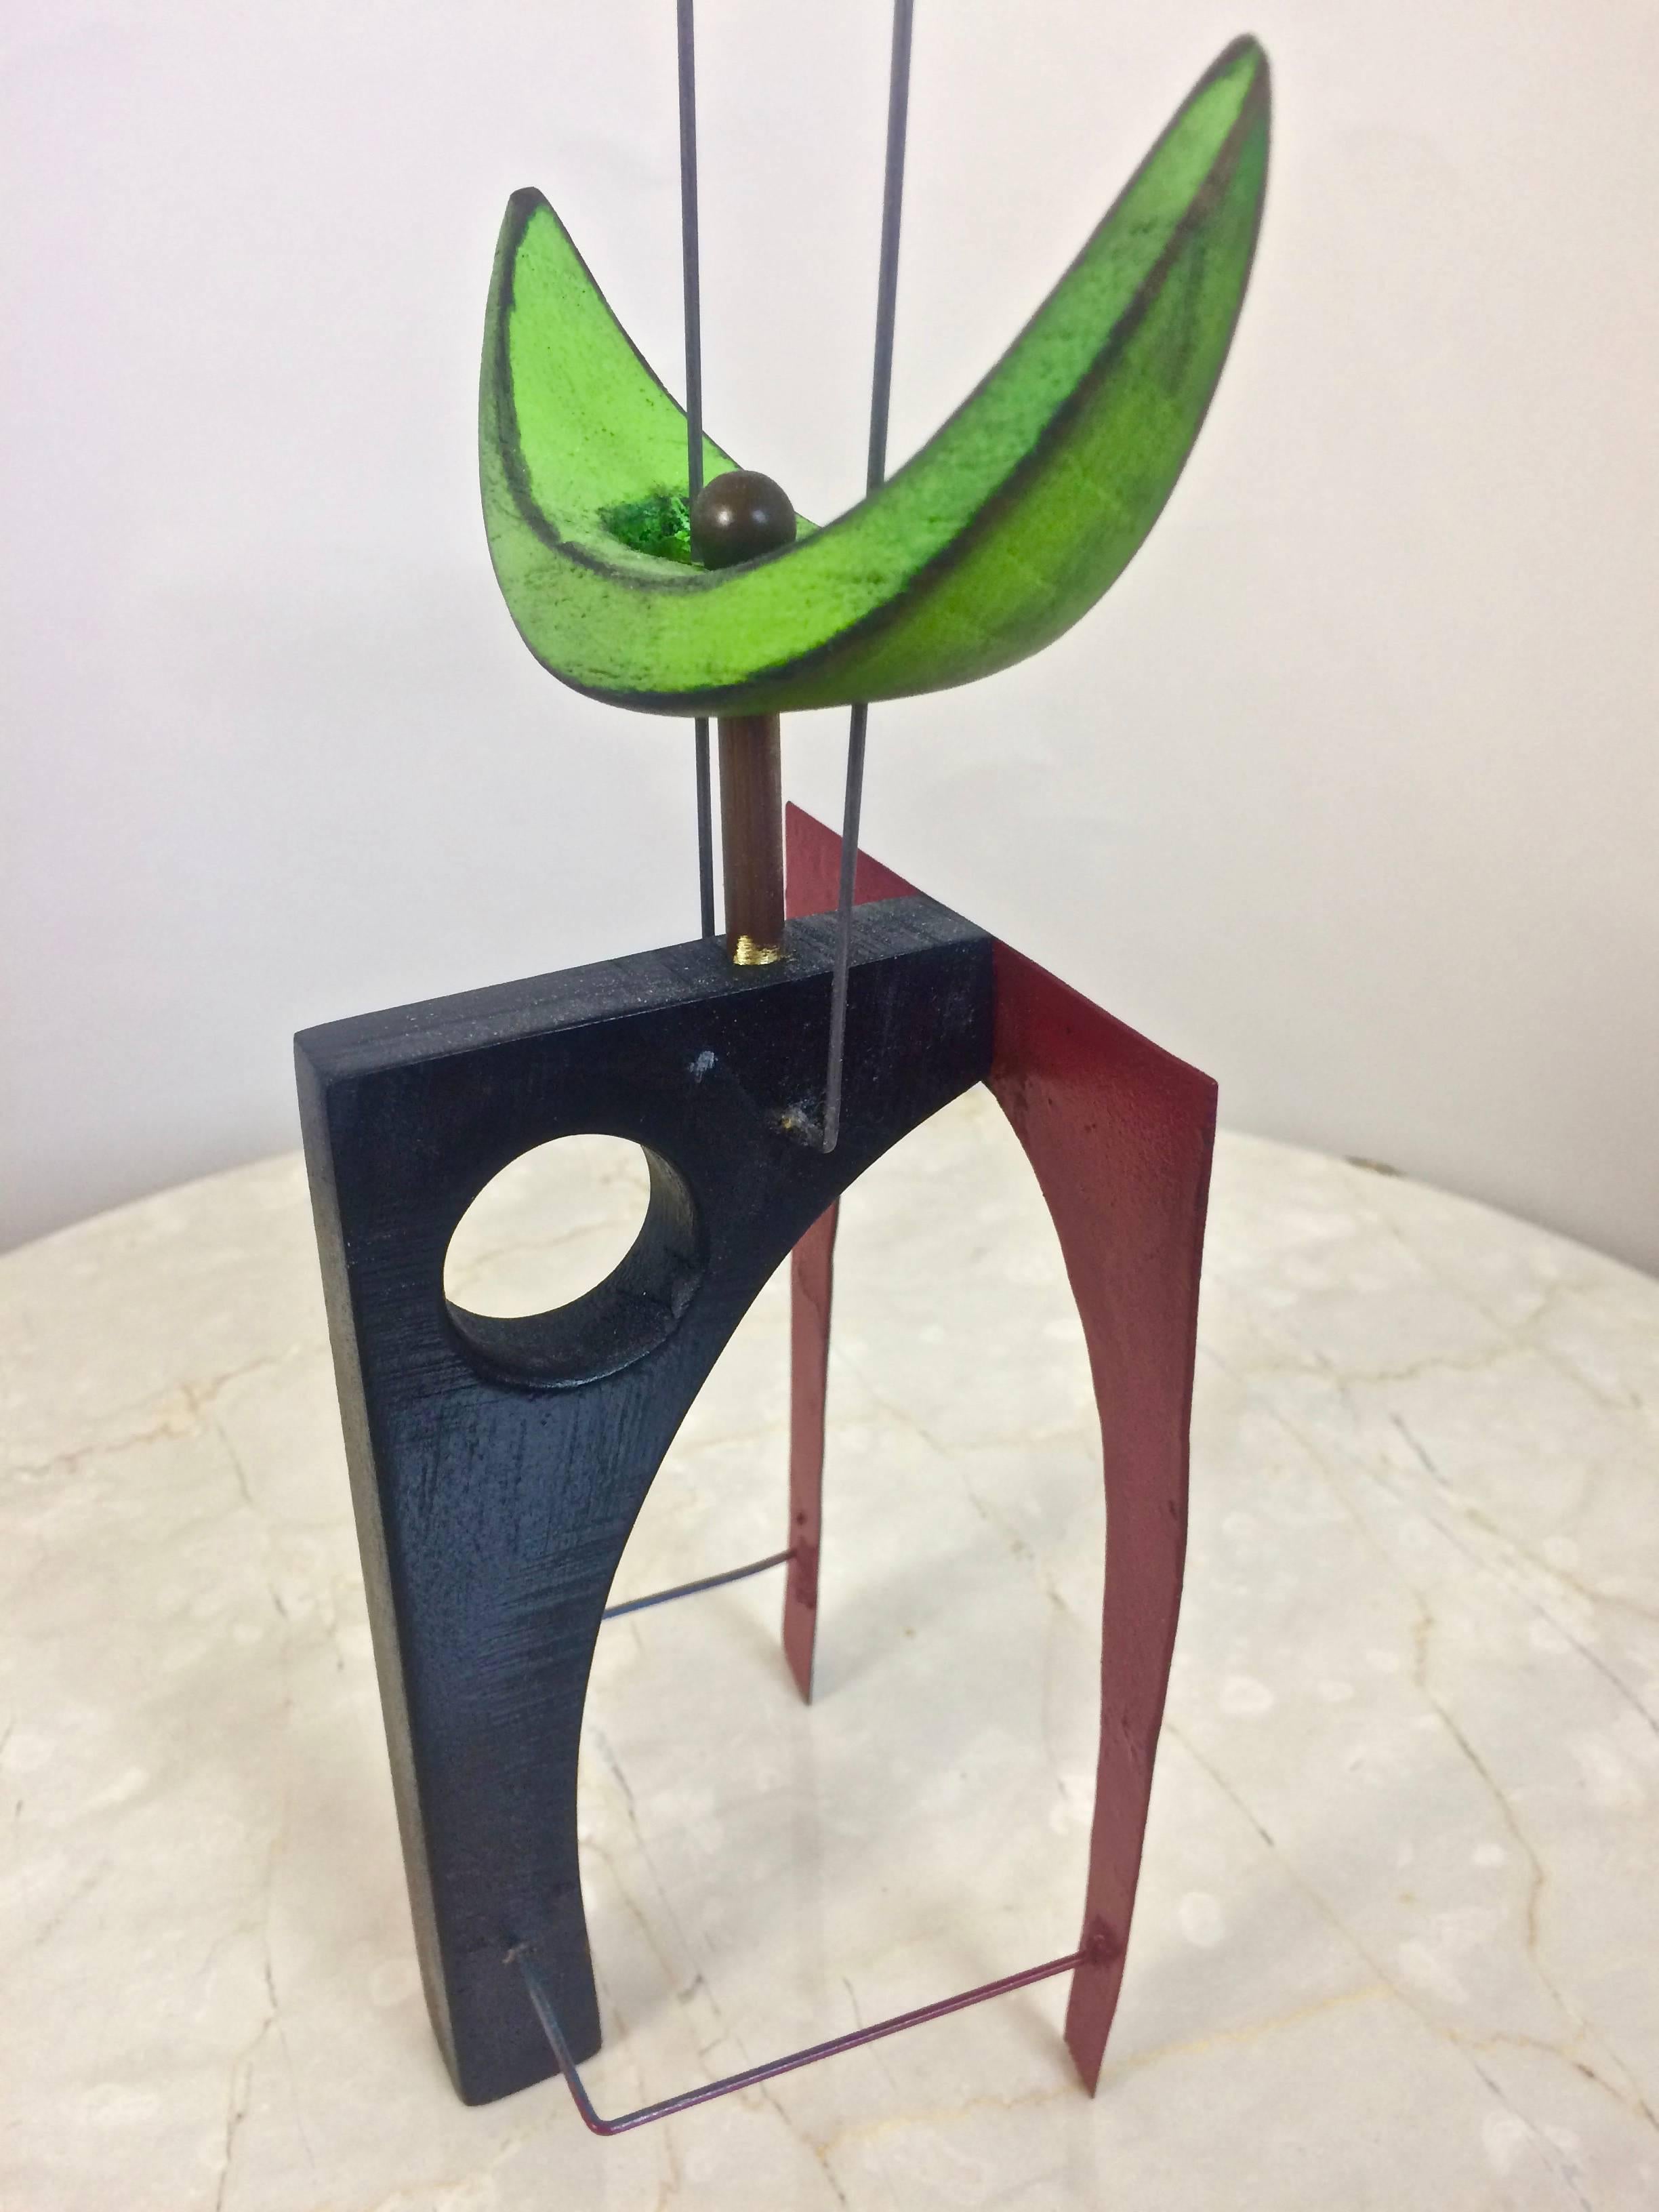 American Adam Henderson Green Door Abstract Sculpture in Poly-Chromed Wood and Wire